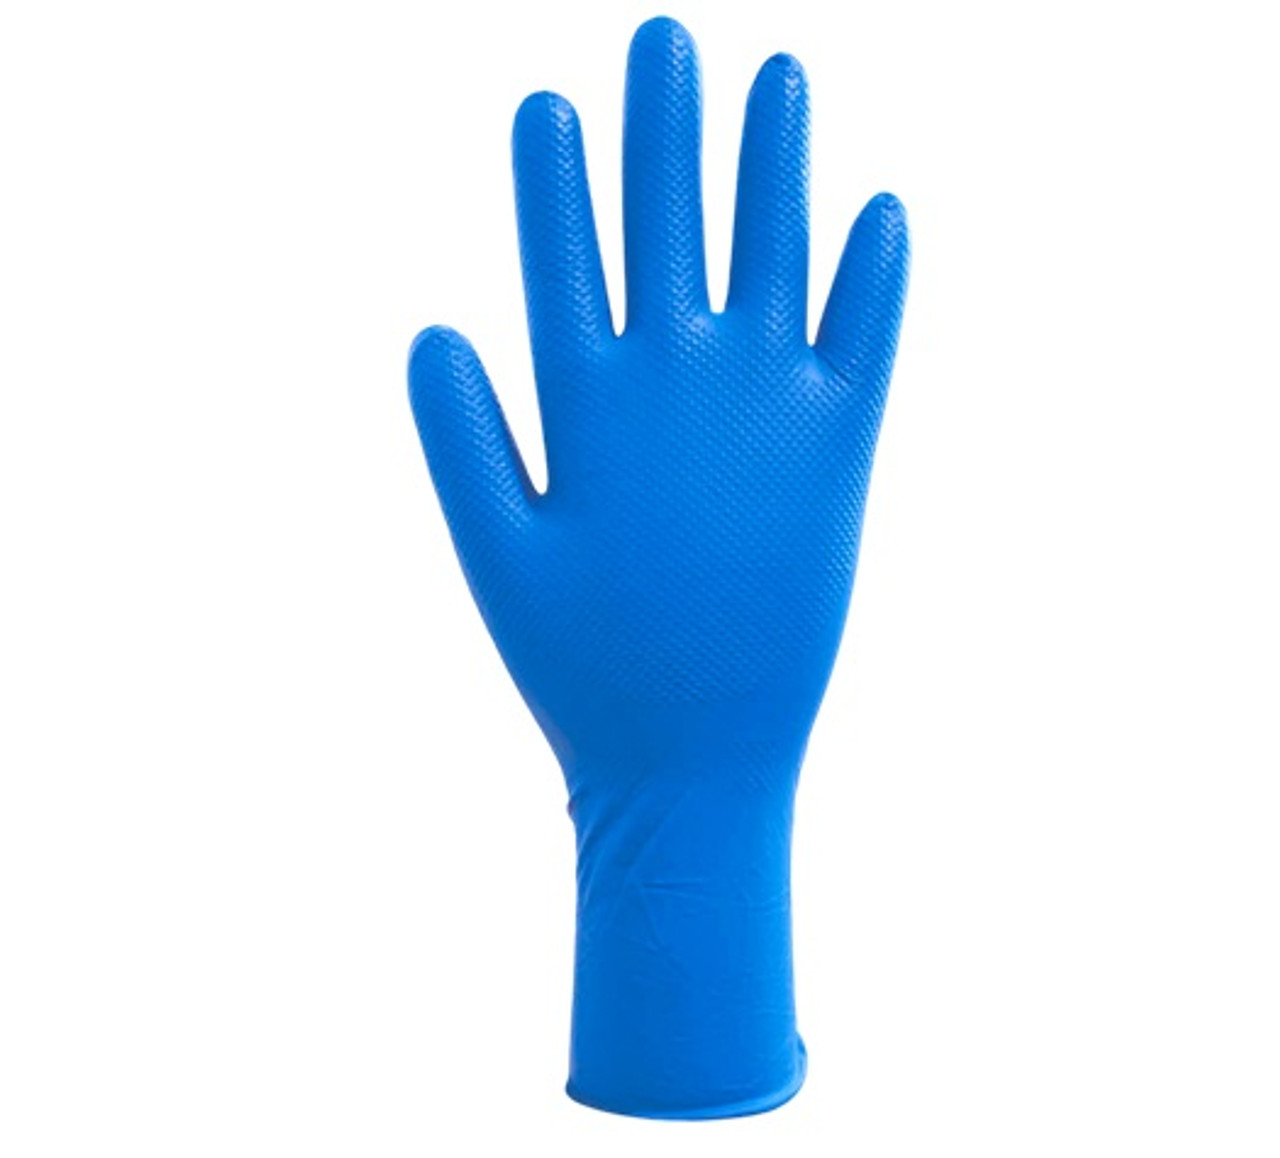 Box of 100 - Small M Care,  Powder free Blue Nitrile, Long Cuff  Examination Gloves,